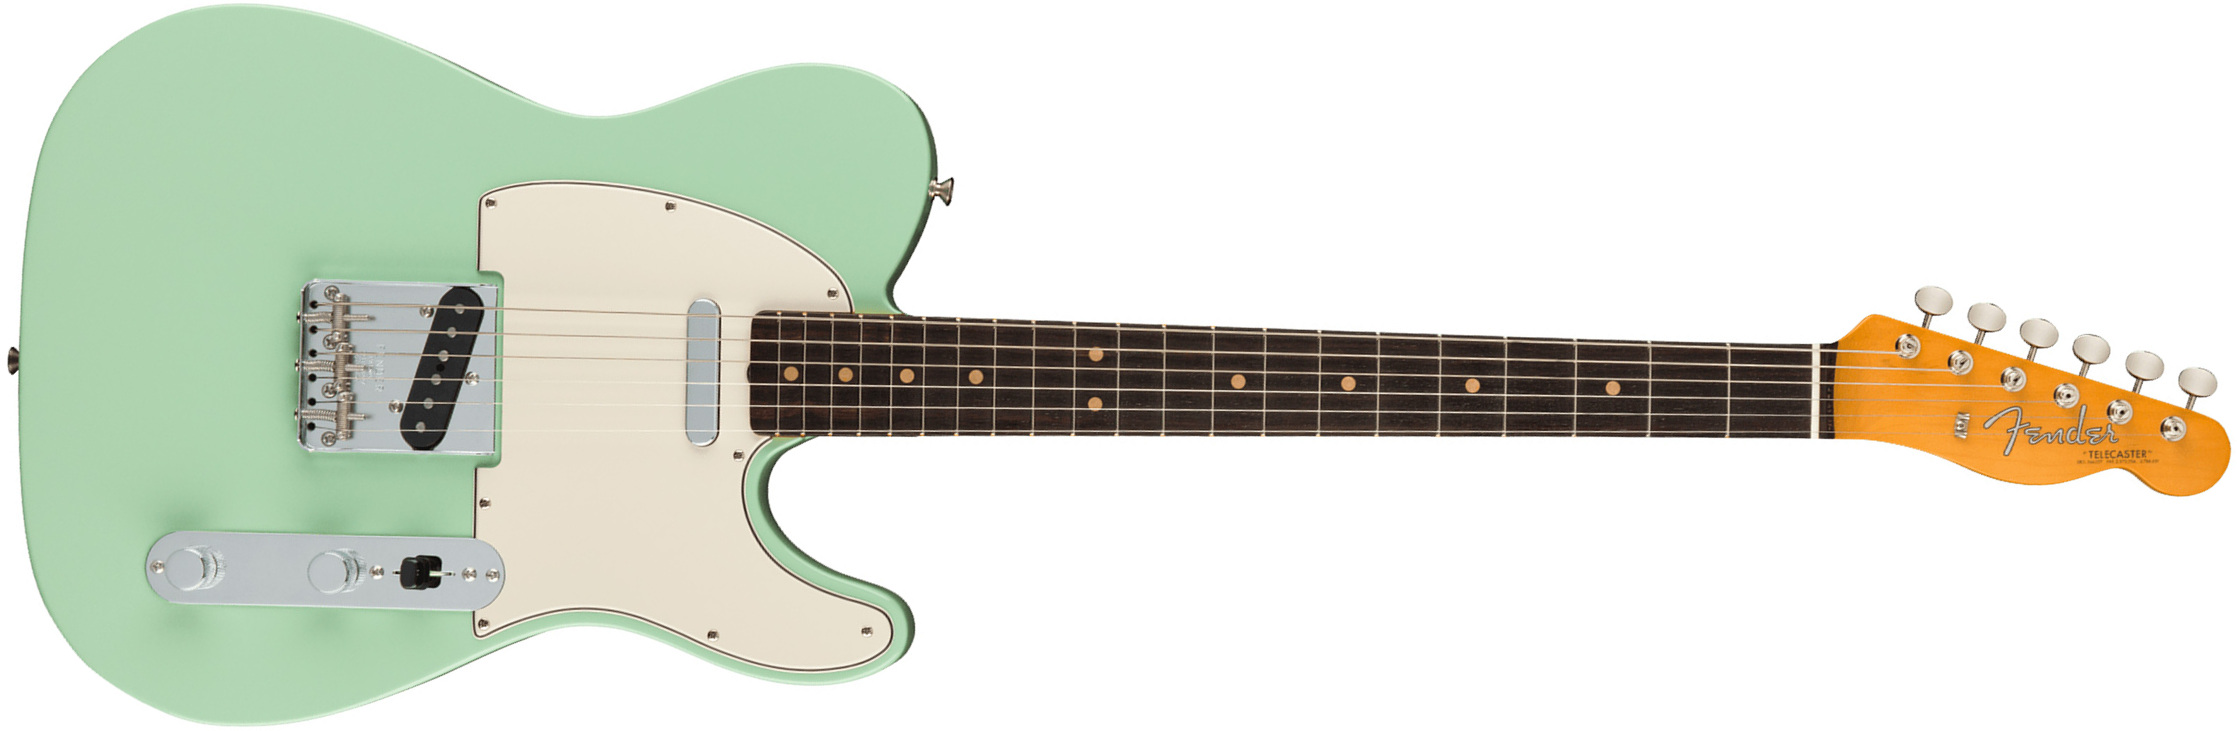 Fender Tele 1963 American Vintage Ii Usa 2s Ht Rw - Surf Green - Tel shape electric guitar - Main picture